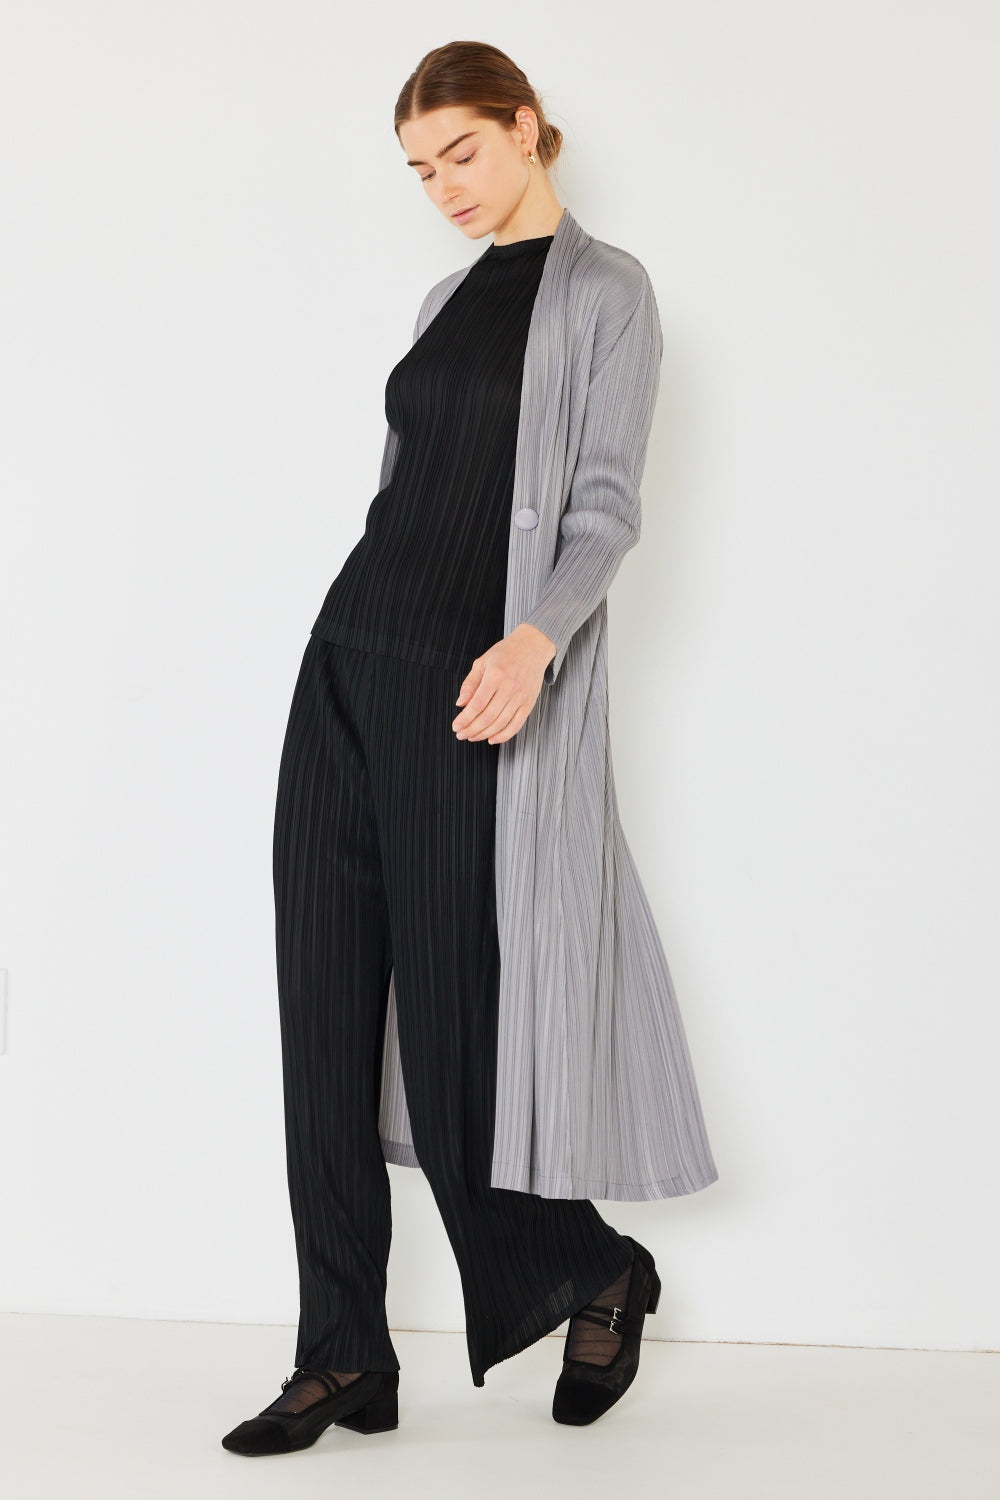 The Pleated Long Sleeve Cardigan is a versatile and chic layering piece for your wardrobe. With its pleated detailing and long sleeves, this cardigan offers a stylish and sophisticated look. The pleats add texture and visual interest to the classic cardigan design. 